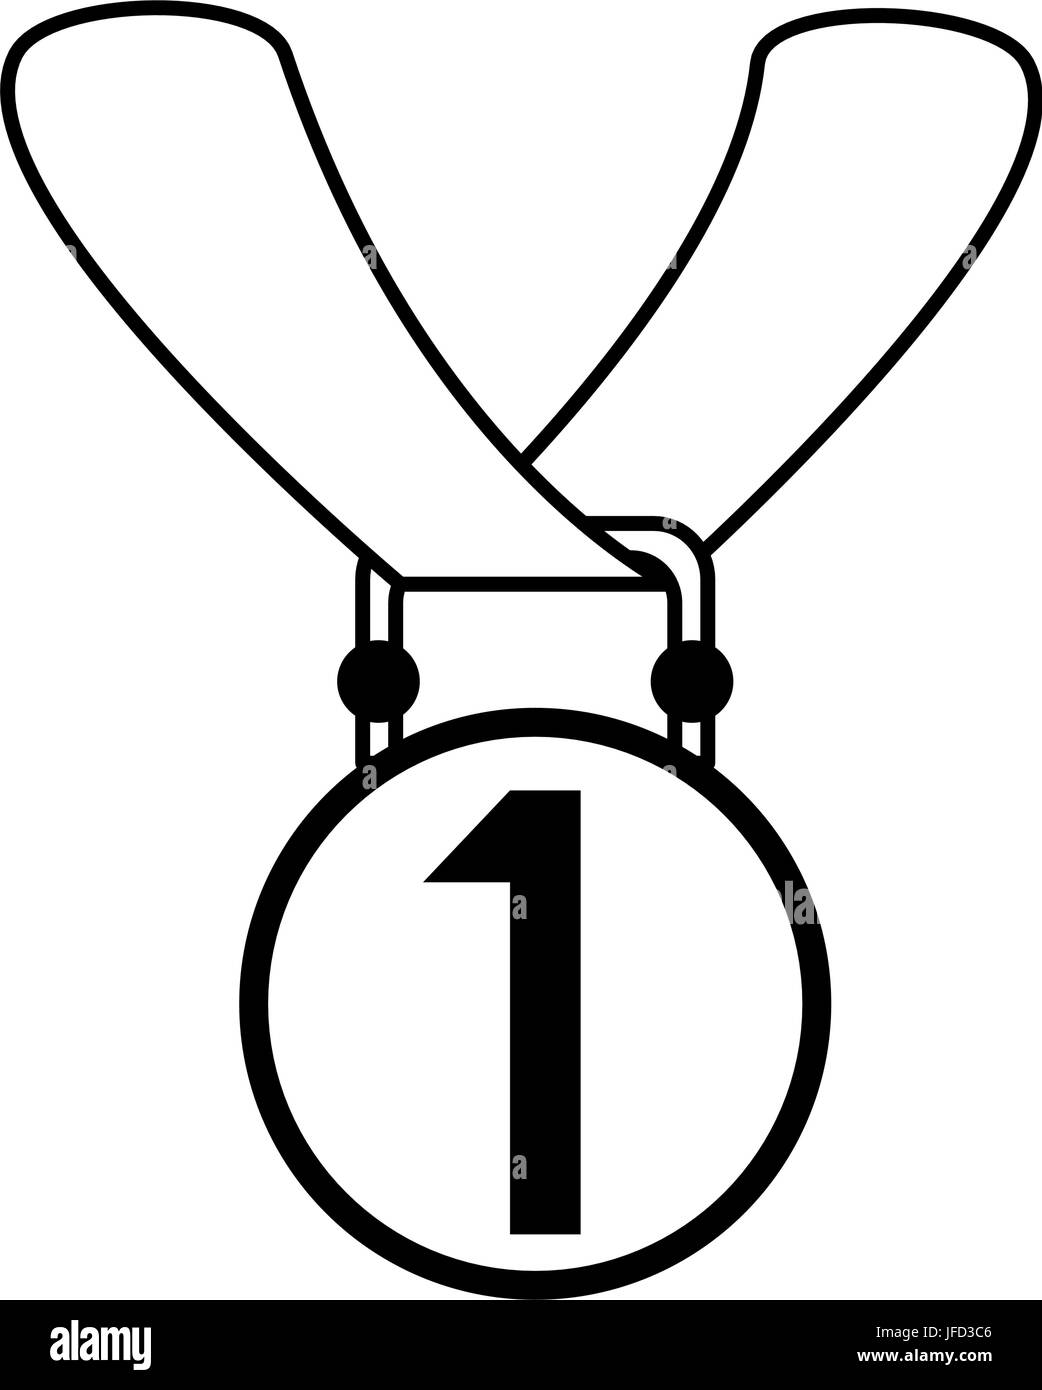 first place medal prize or award icon image  Stock Vector